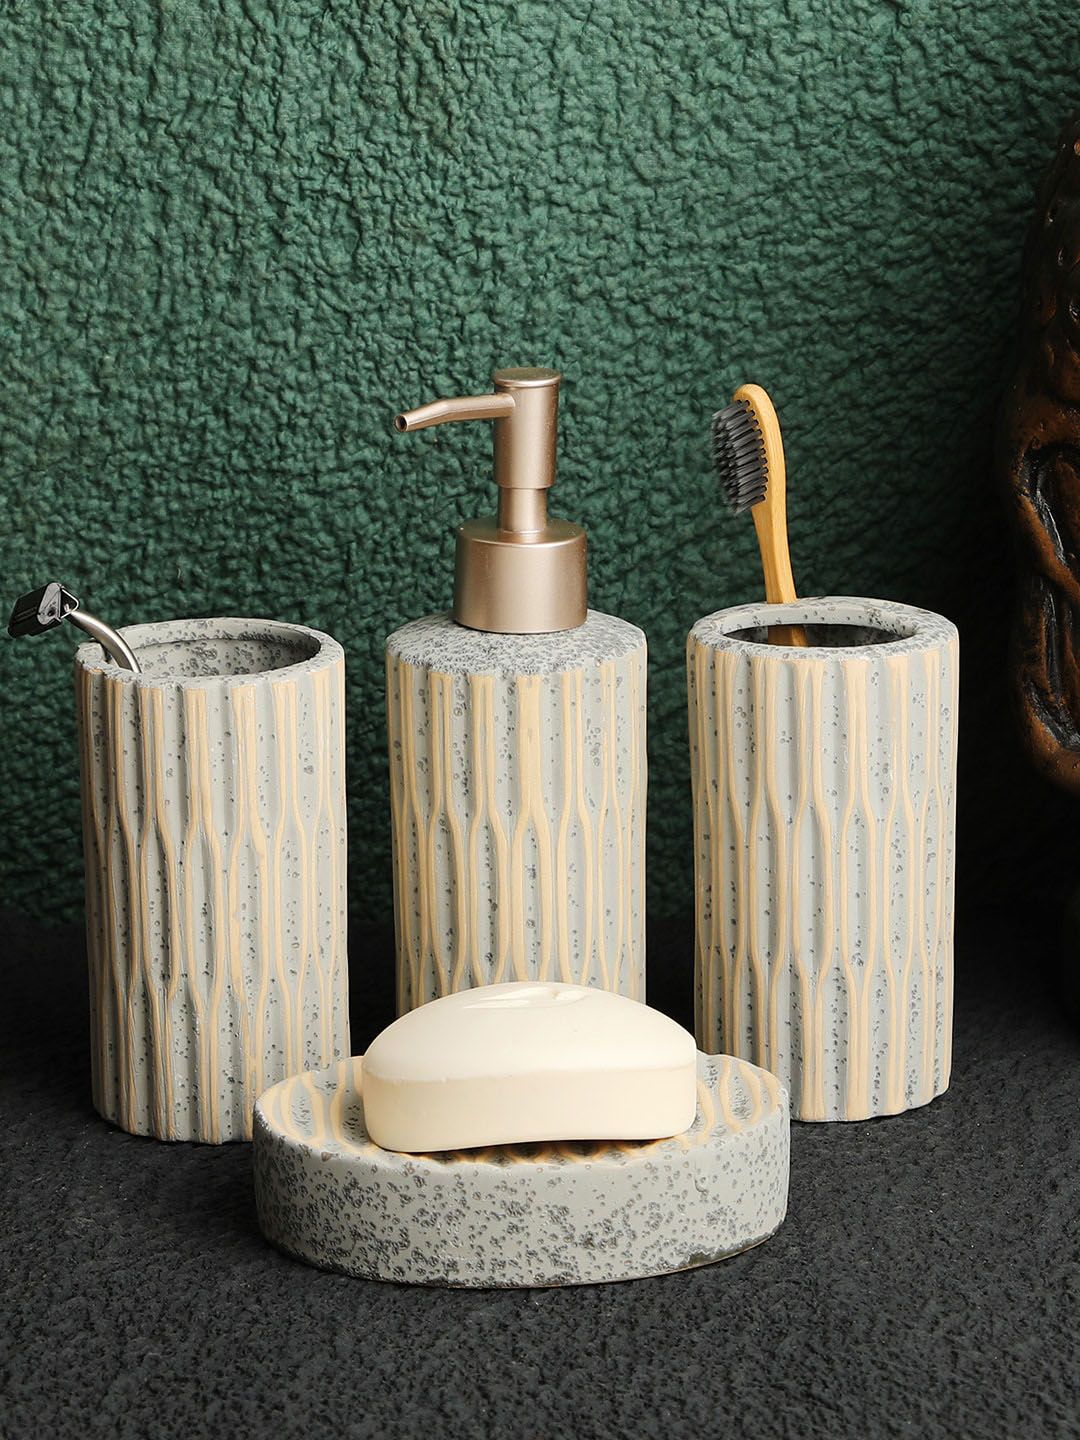 ROMEE Set Of 4 Silver-Toned & Beige Textured Bathroom Accessories Price in India